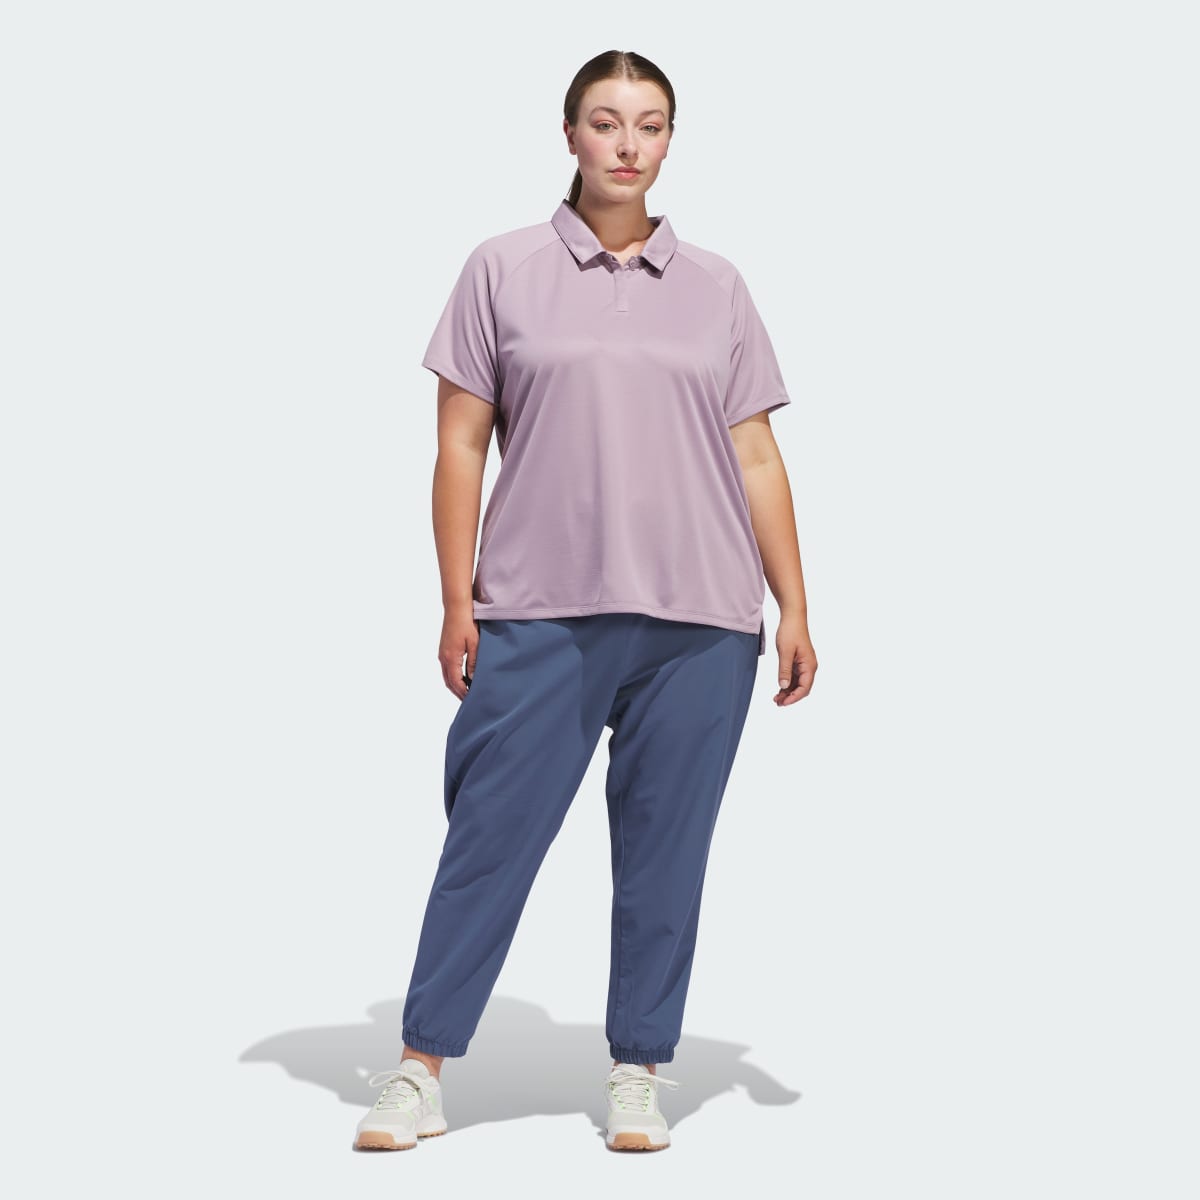 Adidas Ultimate365 Joggers (Plus Size). 5